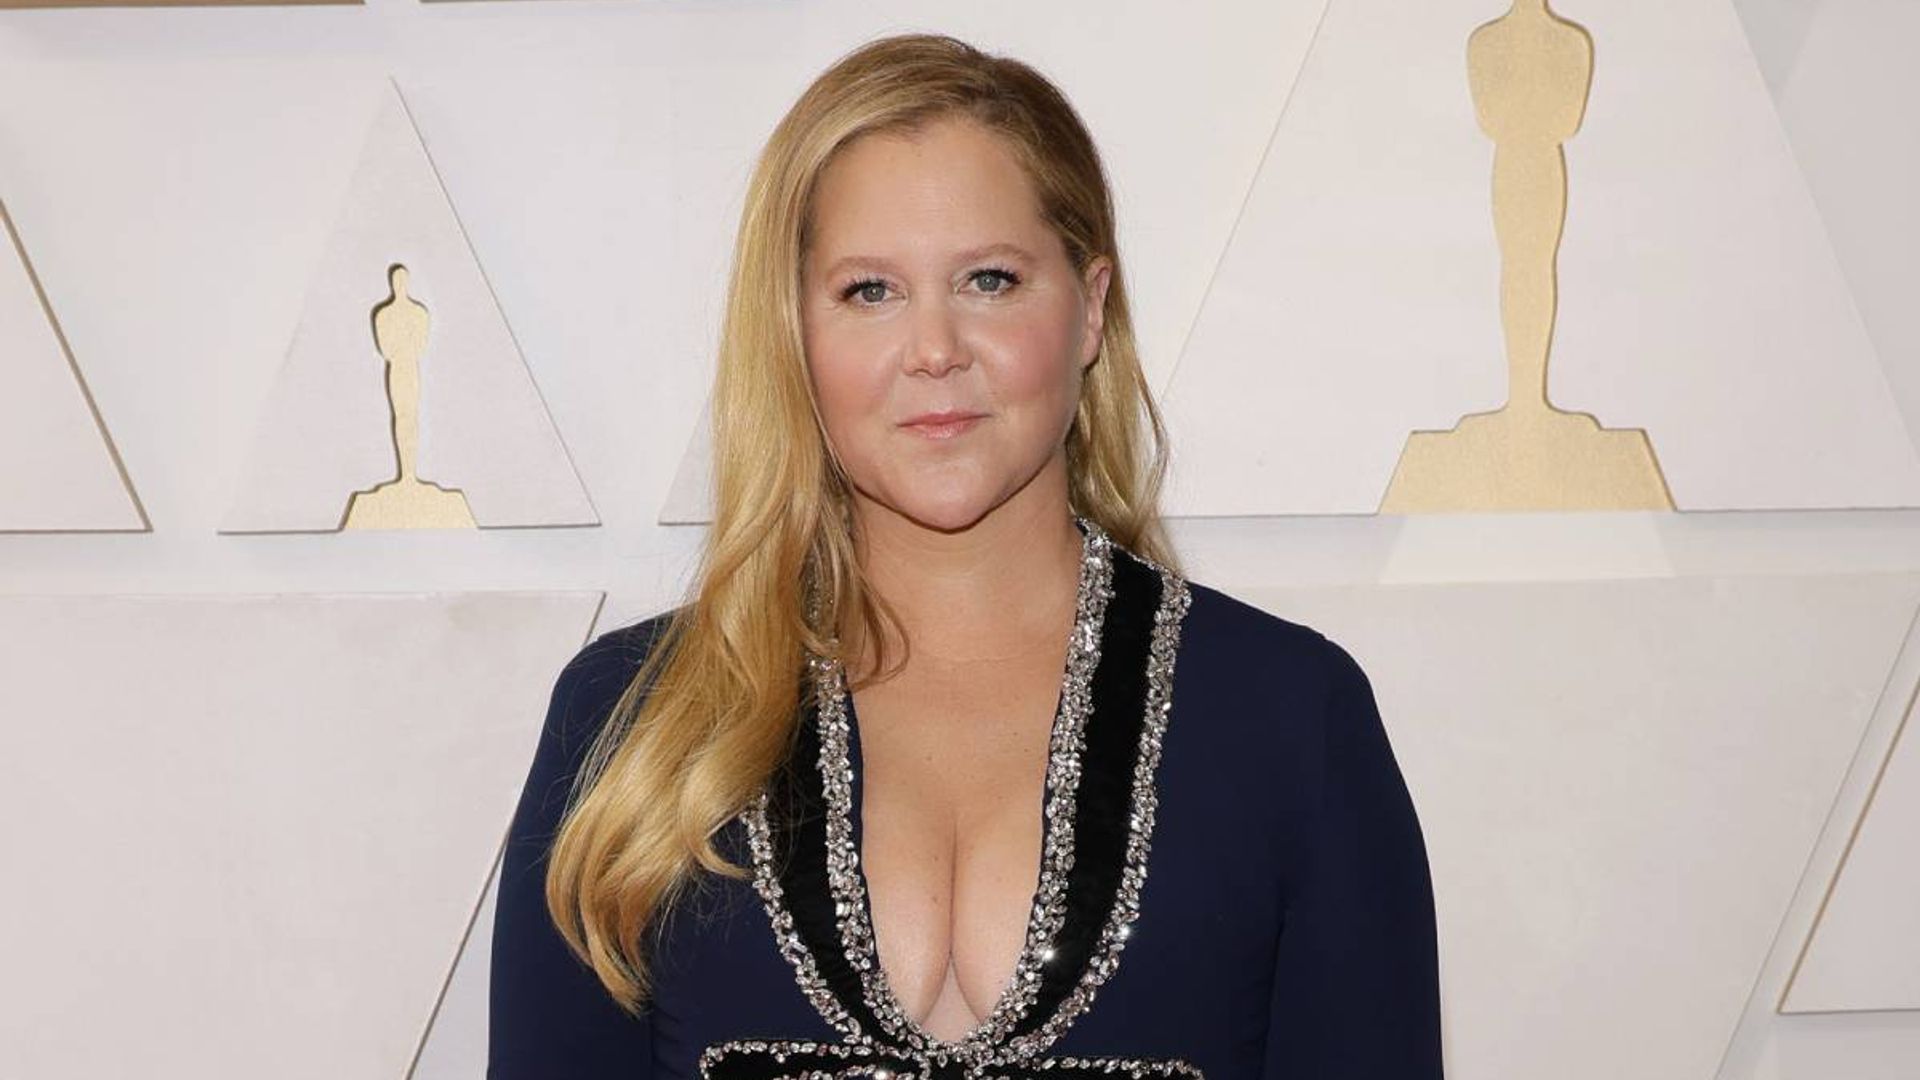 Amy Schumer reveals she's 'traumatized' in shock statement ...